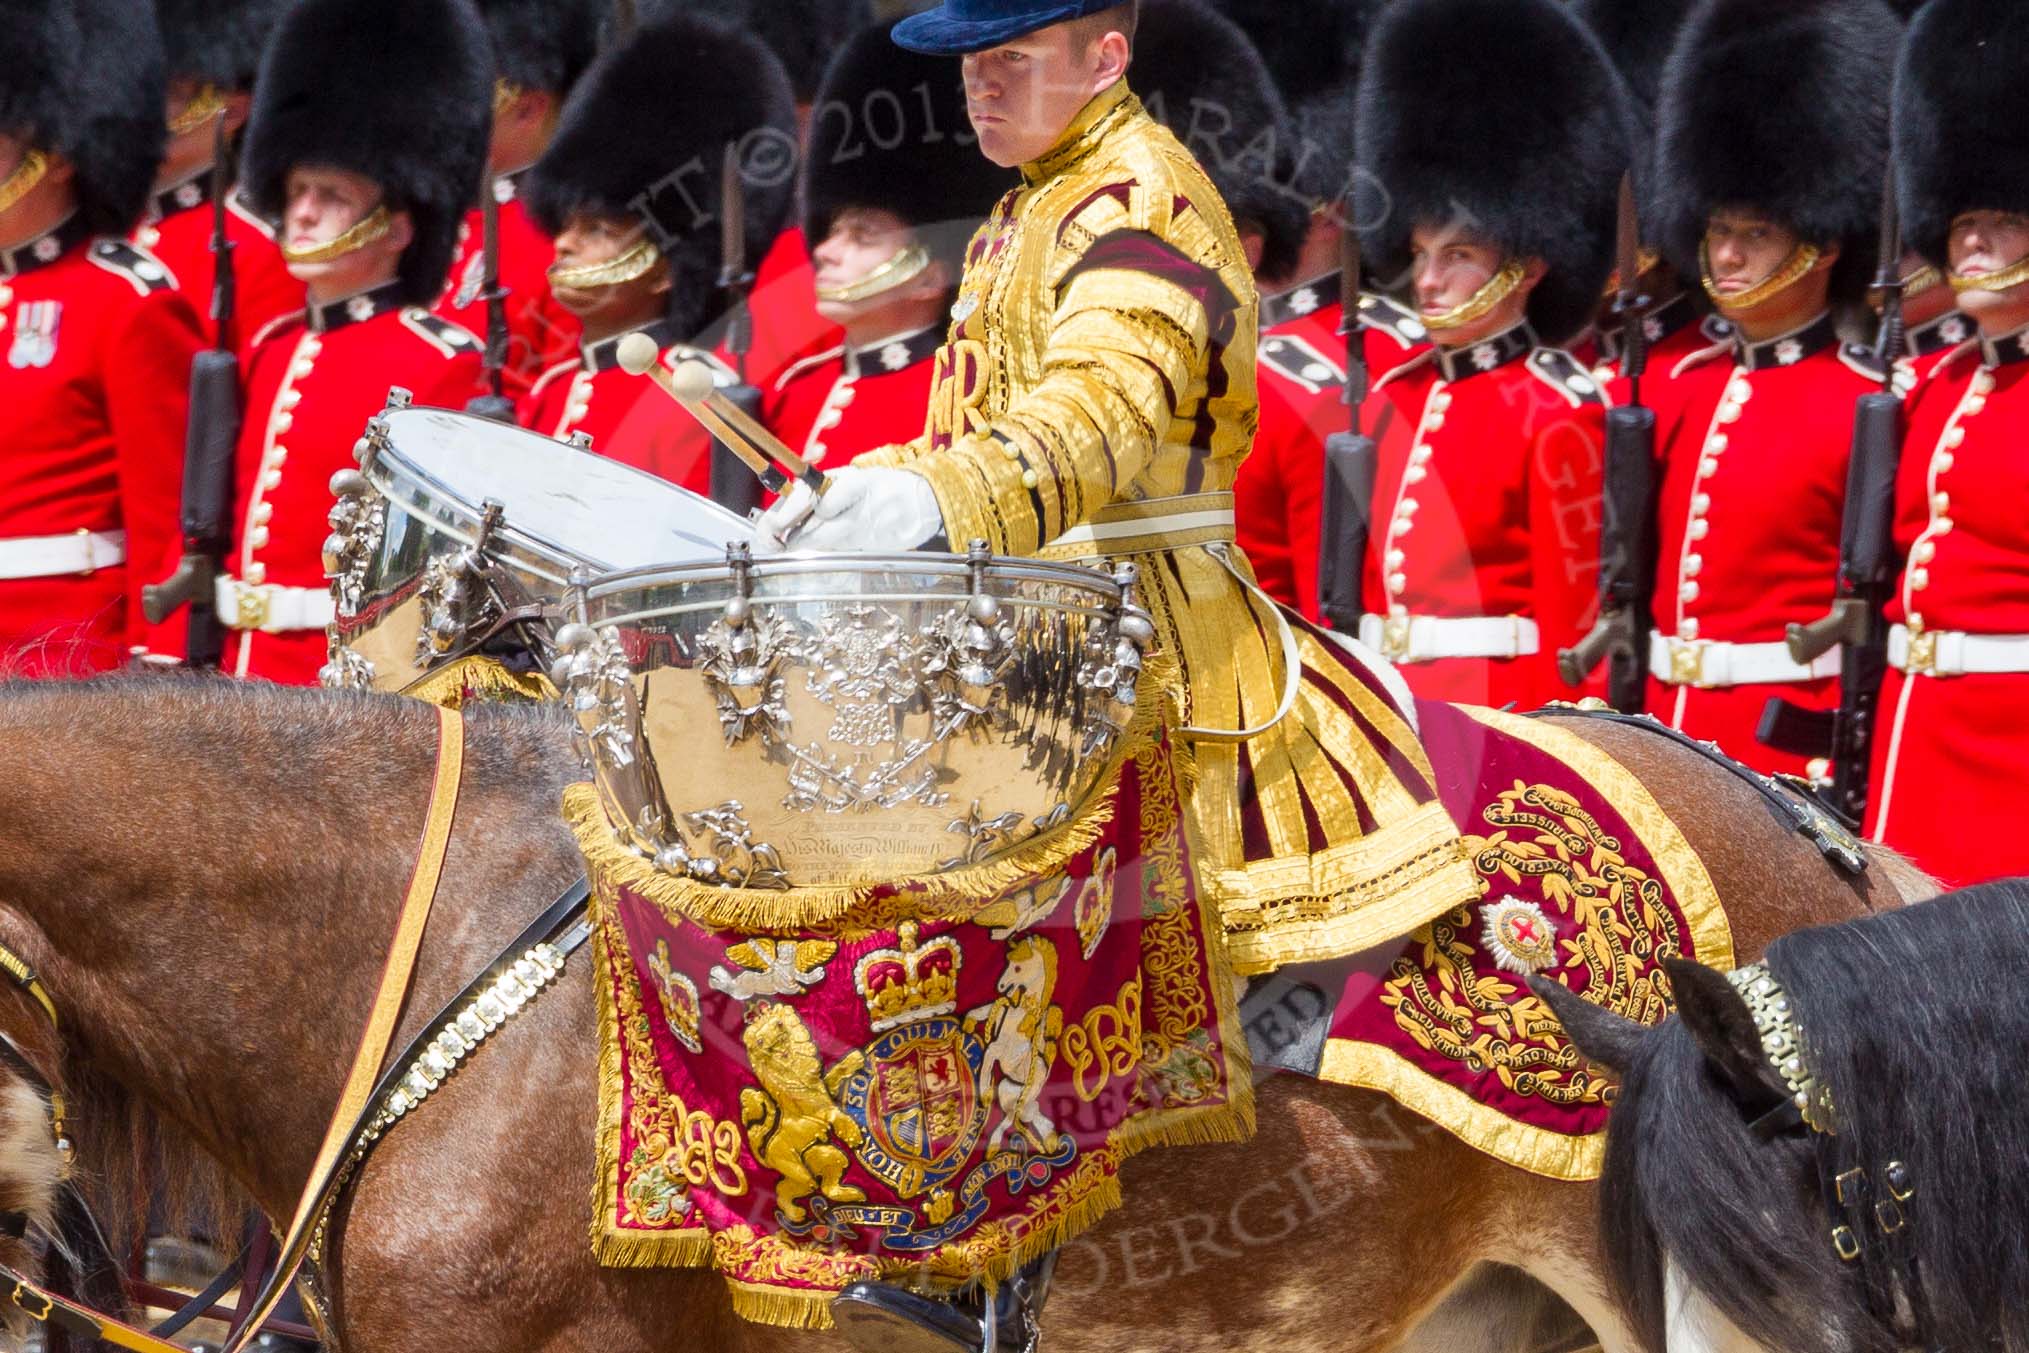 The Colonel's Review 2015.
Horse Guards Parade, Westminster,
London,

United Kingdom,
on 06 June 2015 at 11:50, image #465